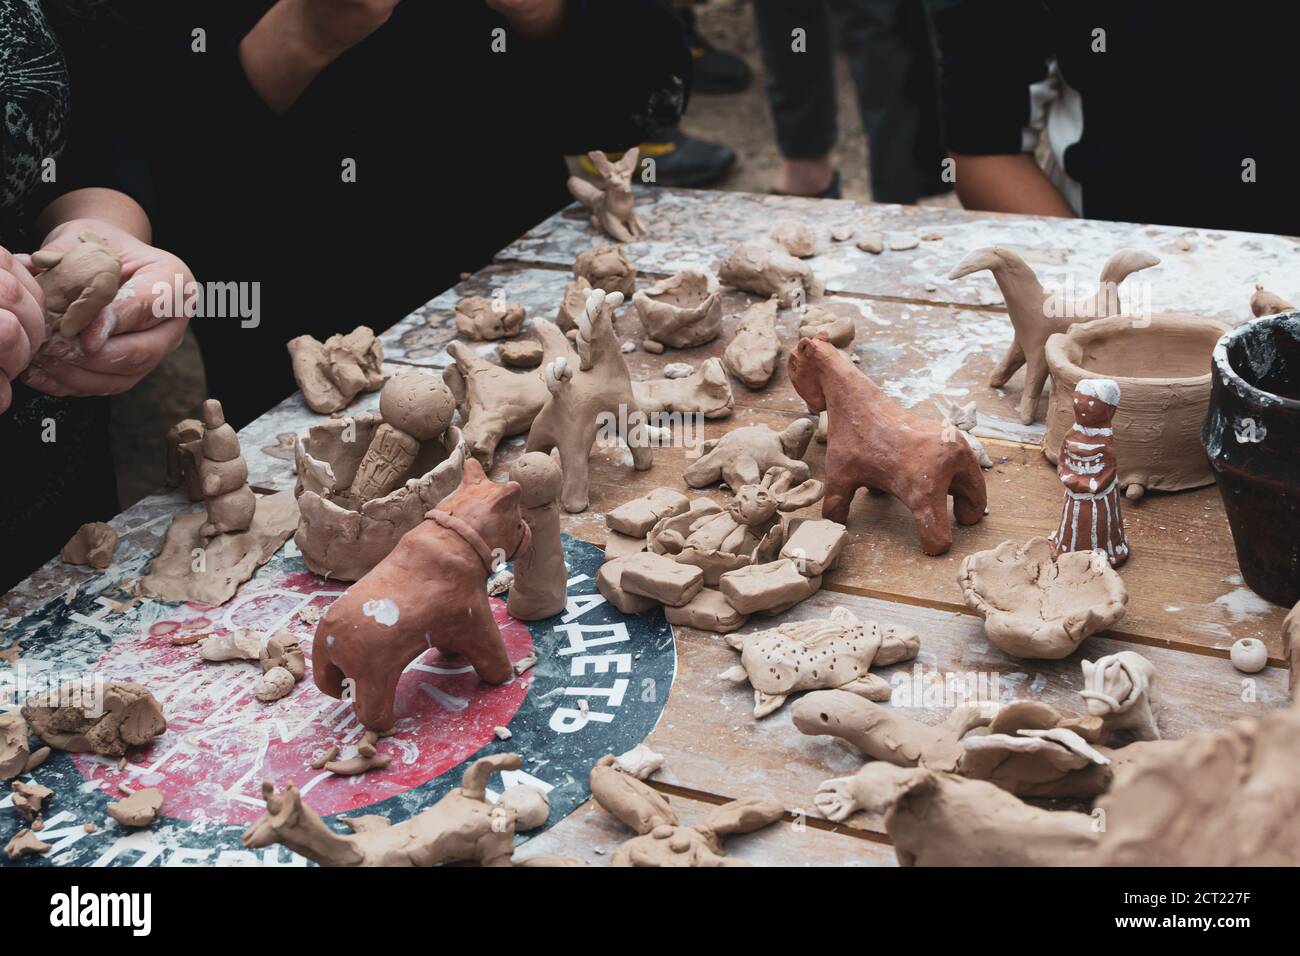 Moscow, Russia - September 5, 2020. Children sculpt clay figurines in the open air. Art, creativity. Modeling clay, cultural traditions, hobby Stock Photo